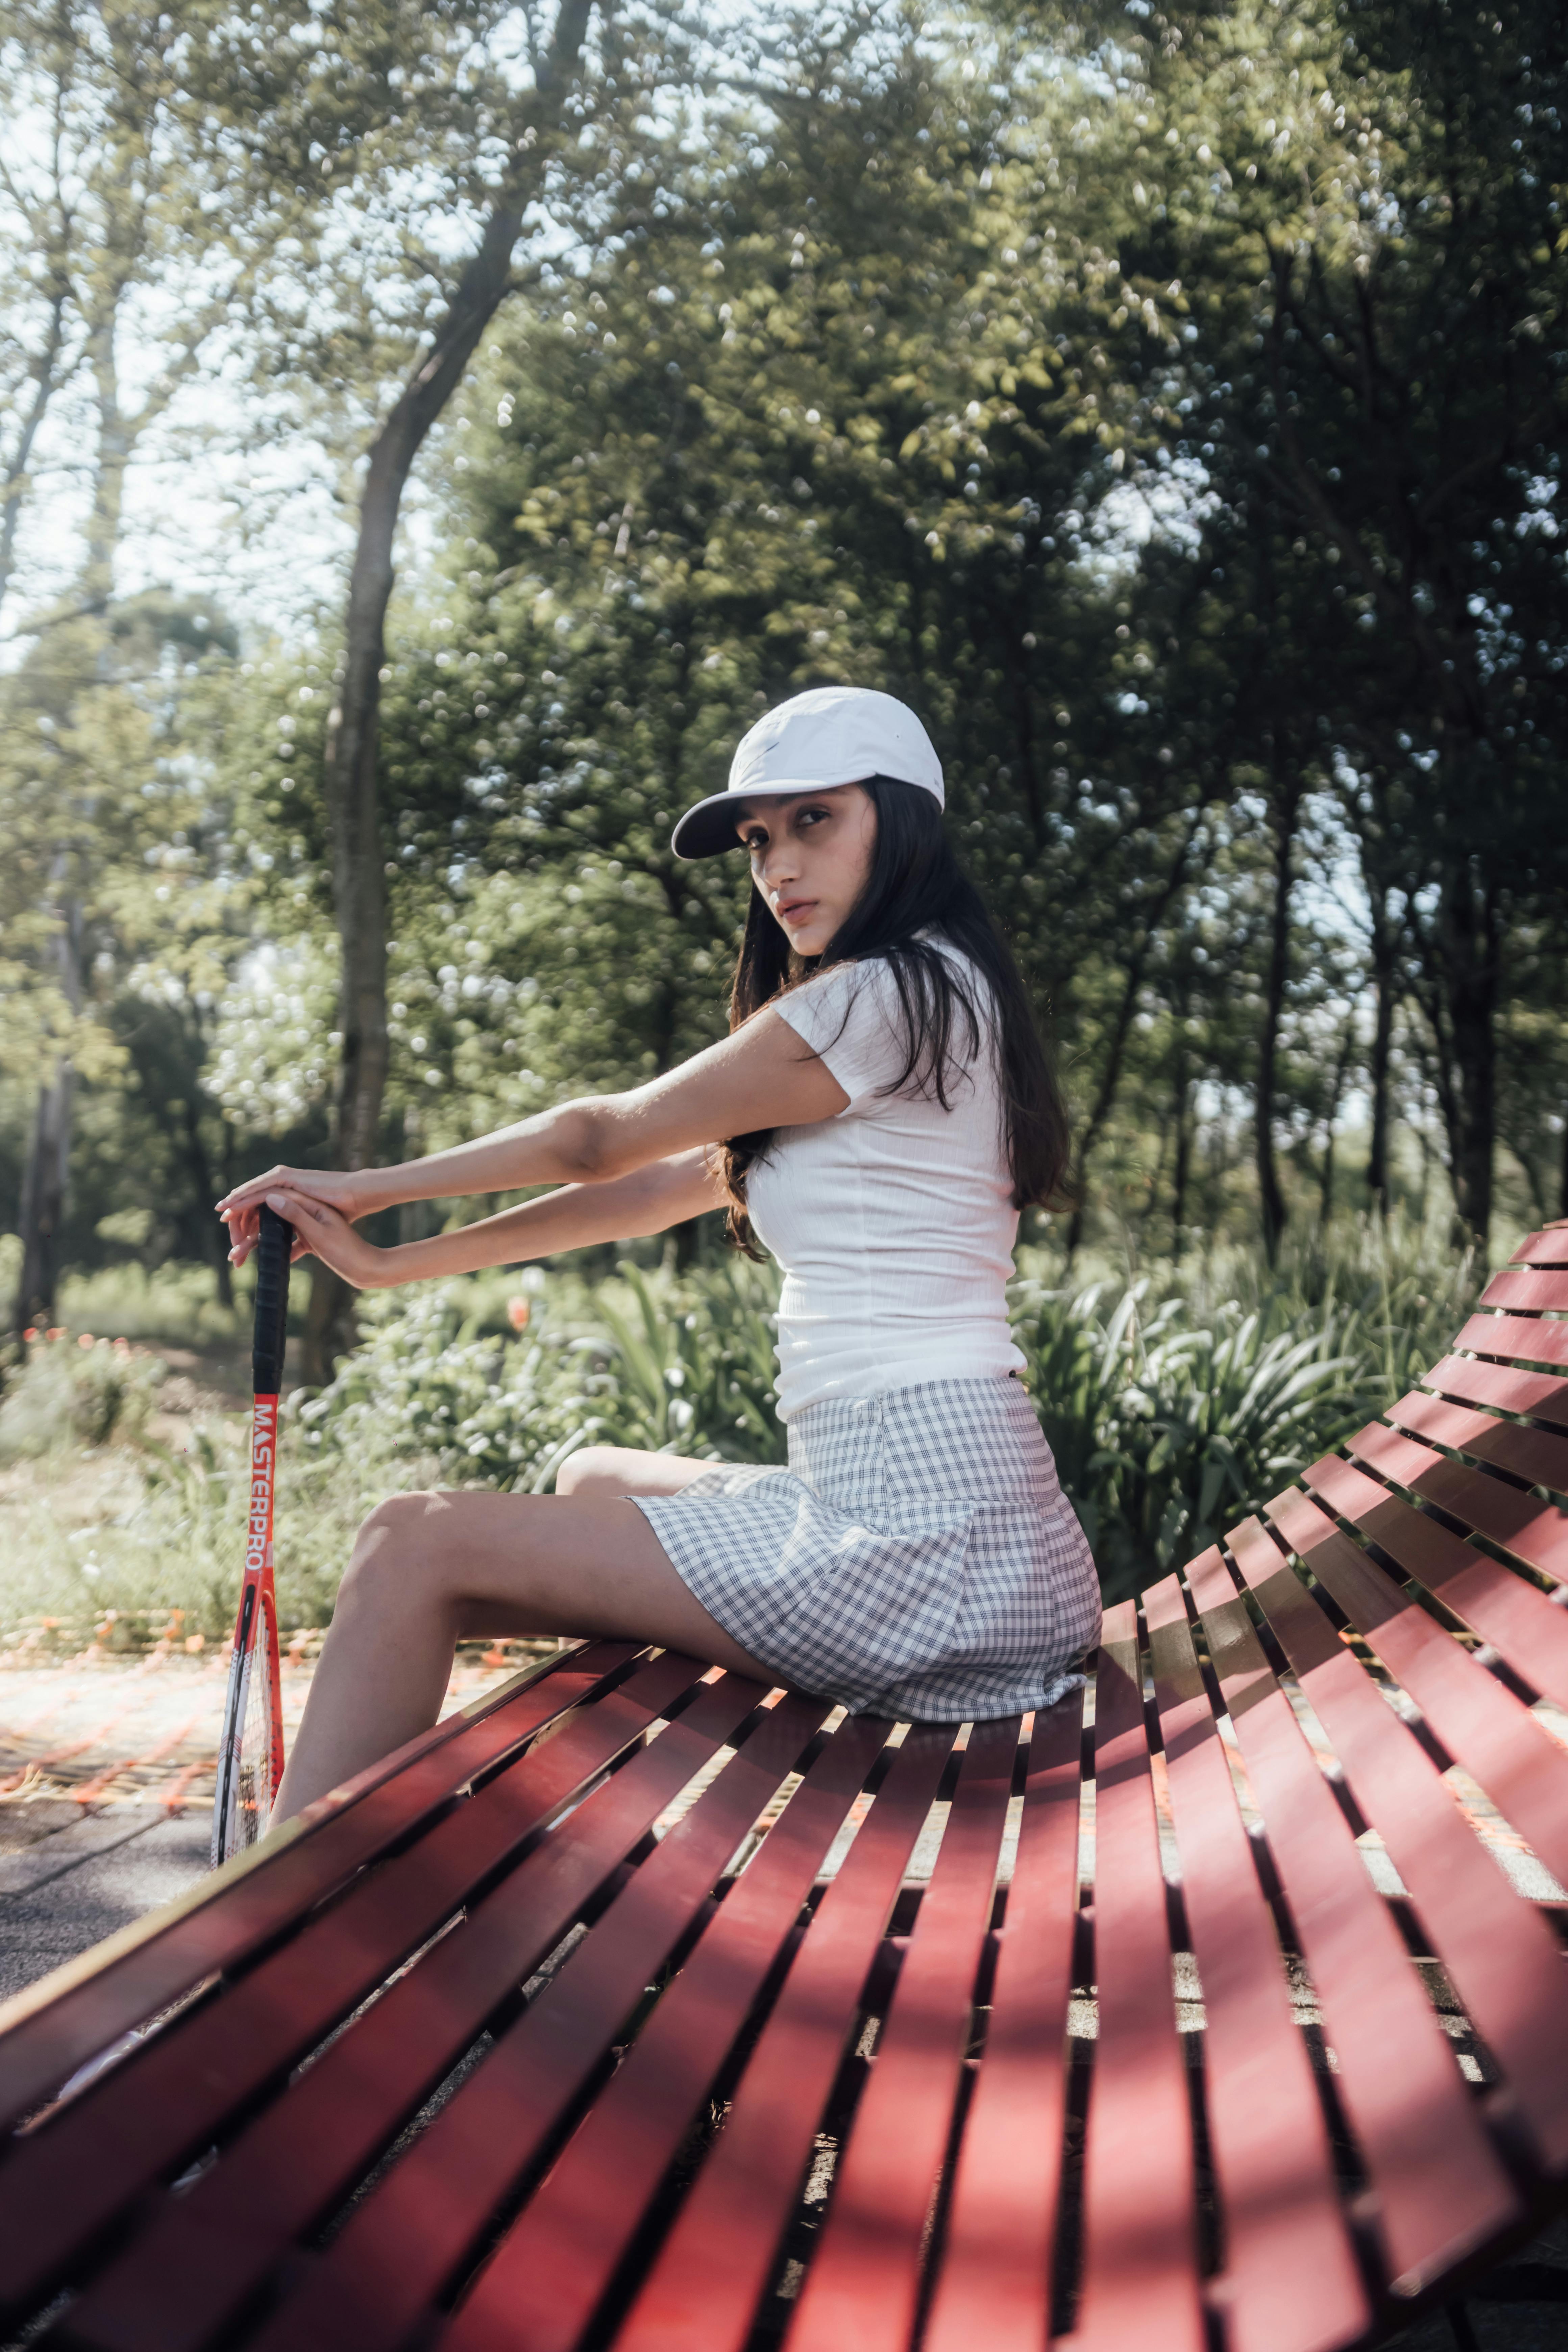 woman in golf clothing holding a club and sitting on a bench